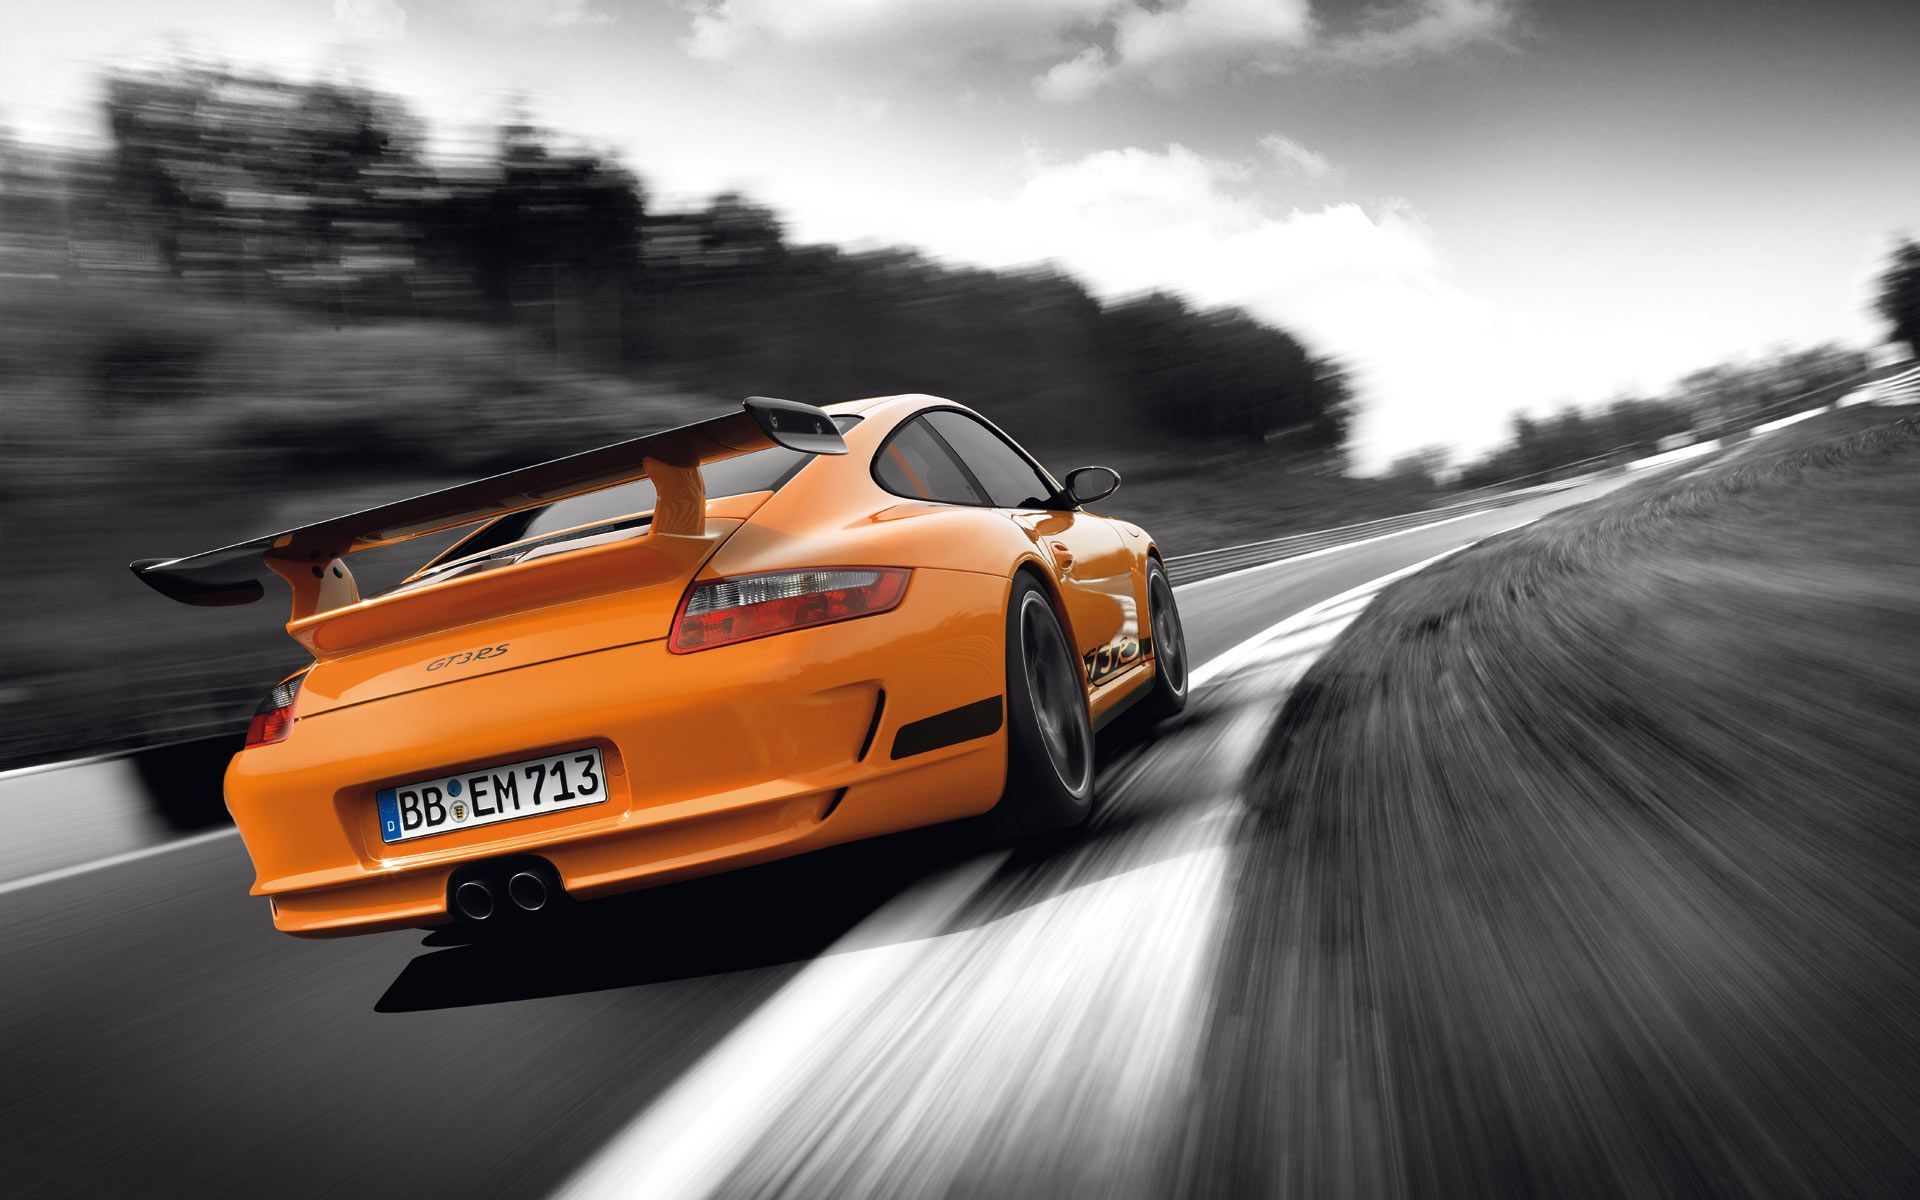 Sports car wallpaper for your desktop in High Quality [HD]. Porsche, Car wallpaper, Sports car wallpaper